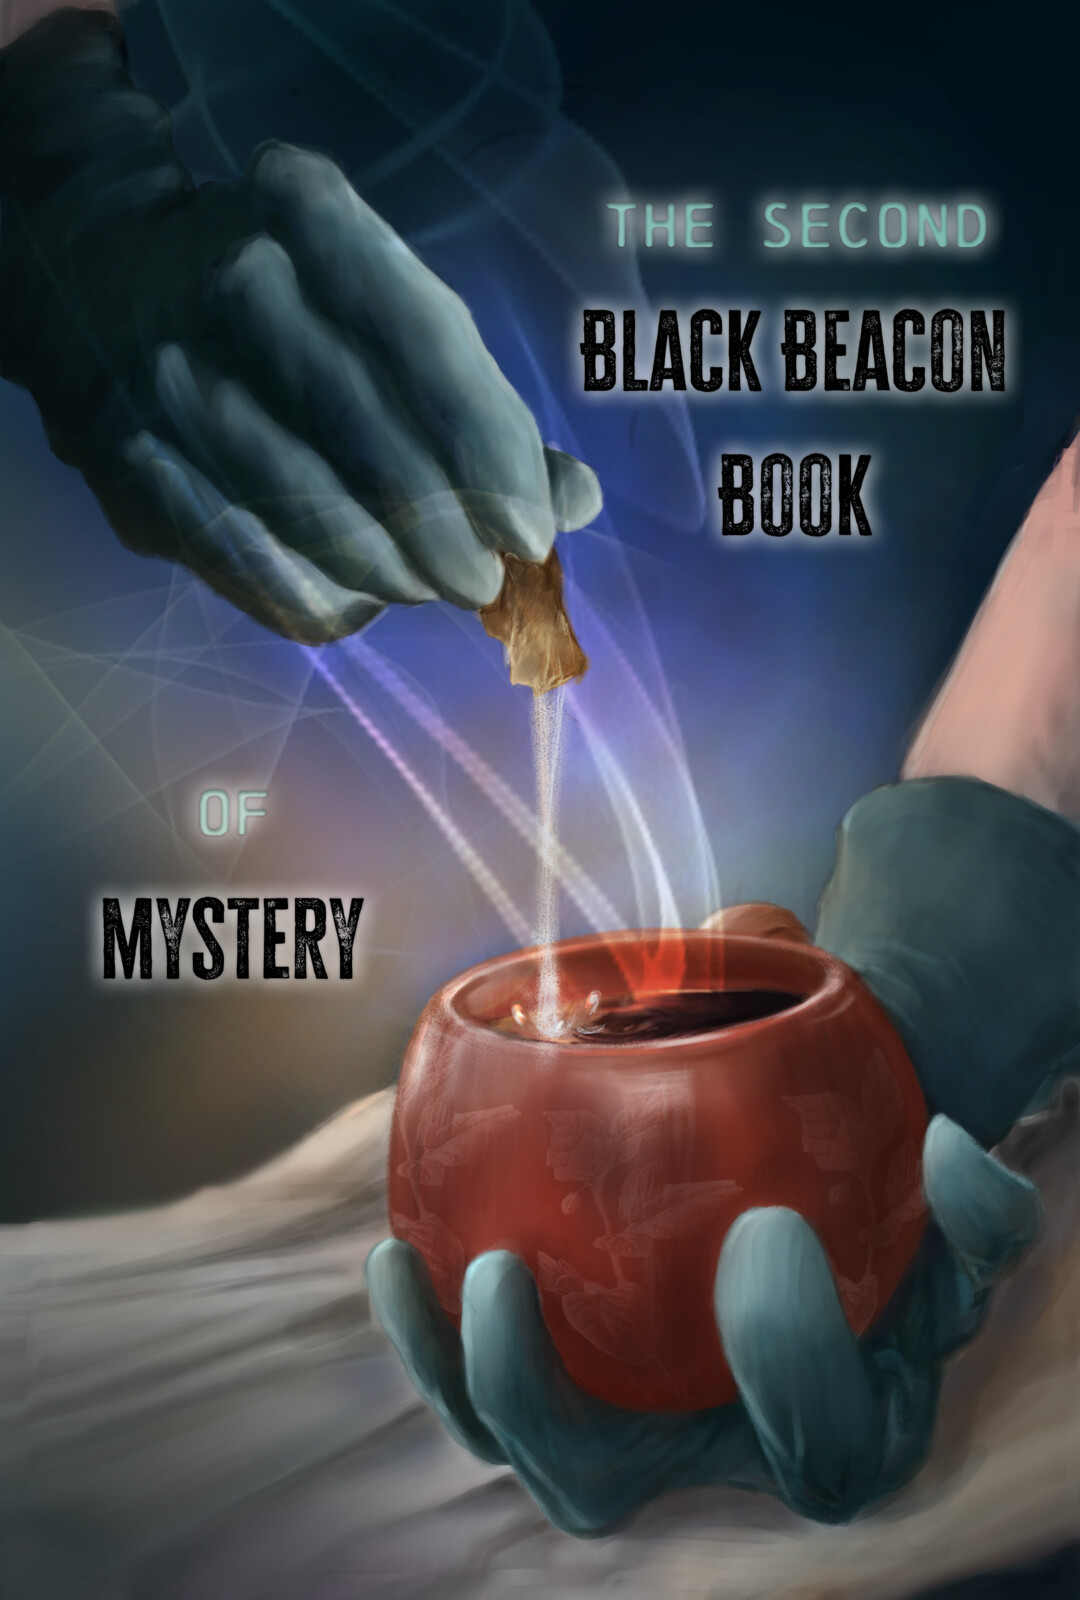 The Second Black Beacon Book of Mystery - Book Cover